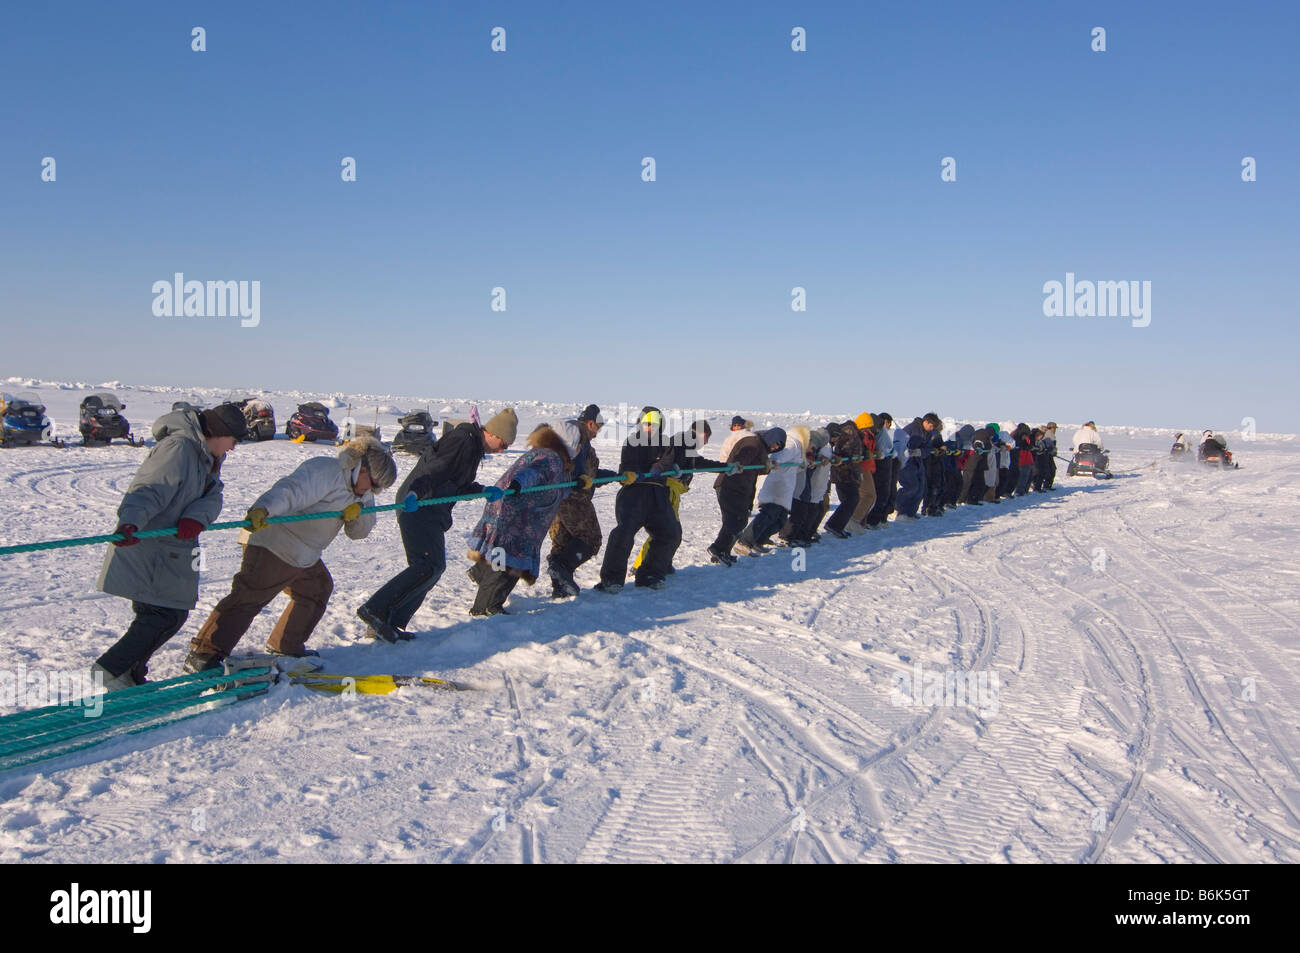 Using a block and tackle pulley system residents of the Inupiaq village of Barrow Alaska assist subsistence whalers in pulling Stock Photo